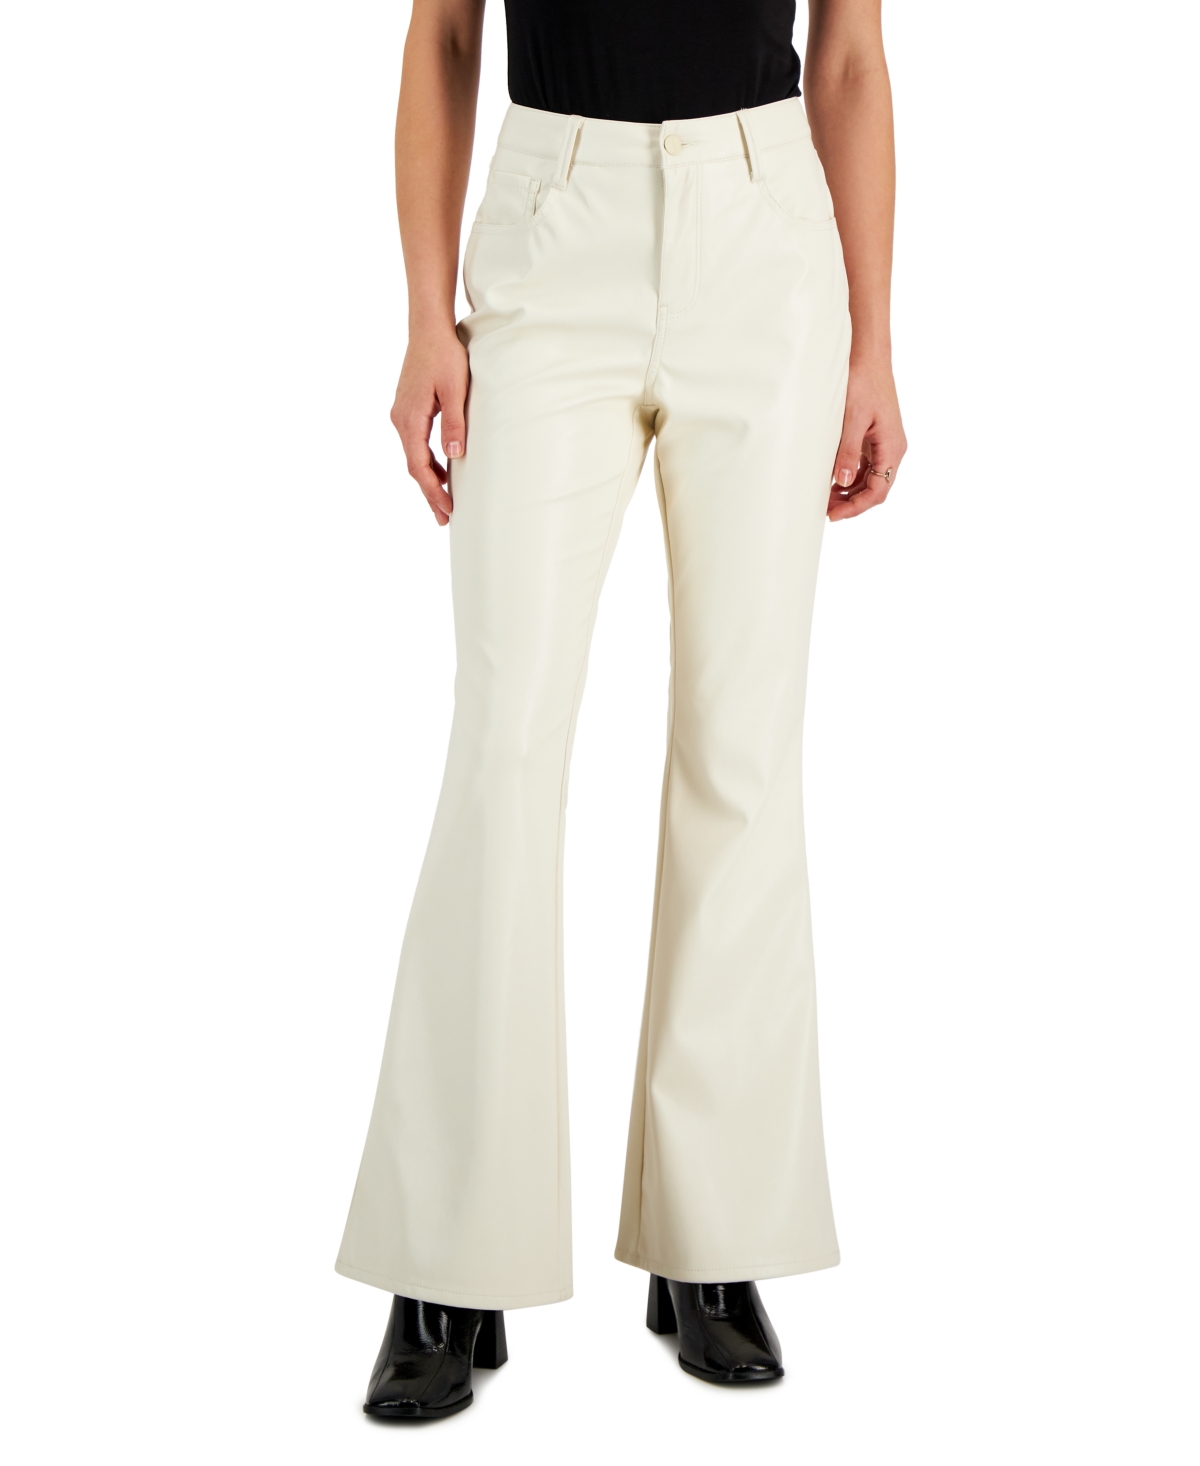 Juniors' Glossy High Rise Faux-Leather Flare Jeans - Winter White